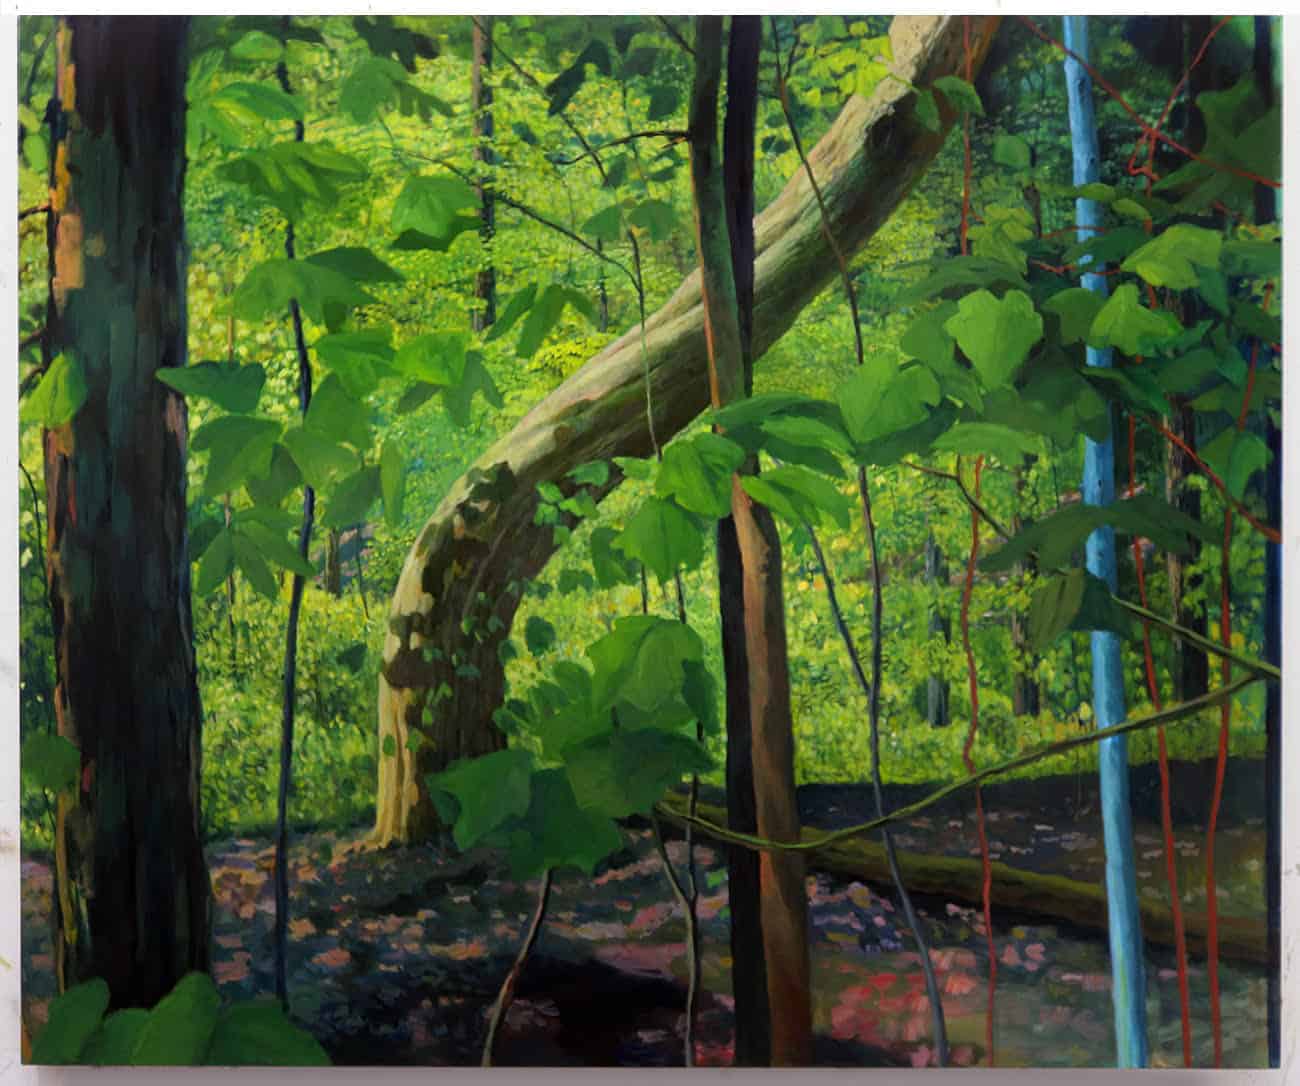 Trees angle toward the sun in dappled shade in 'Bend,' oil on canvas, in the Ecophilia exhibit at the Berkshire Botanical Garden.